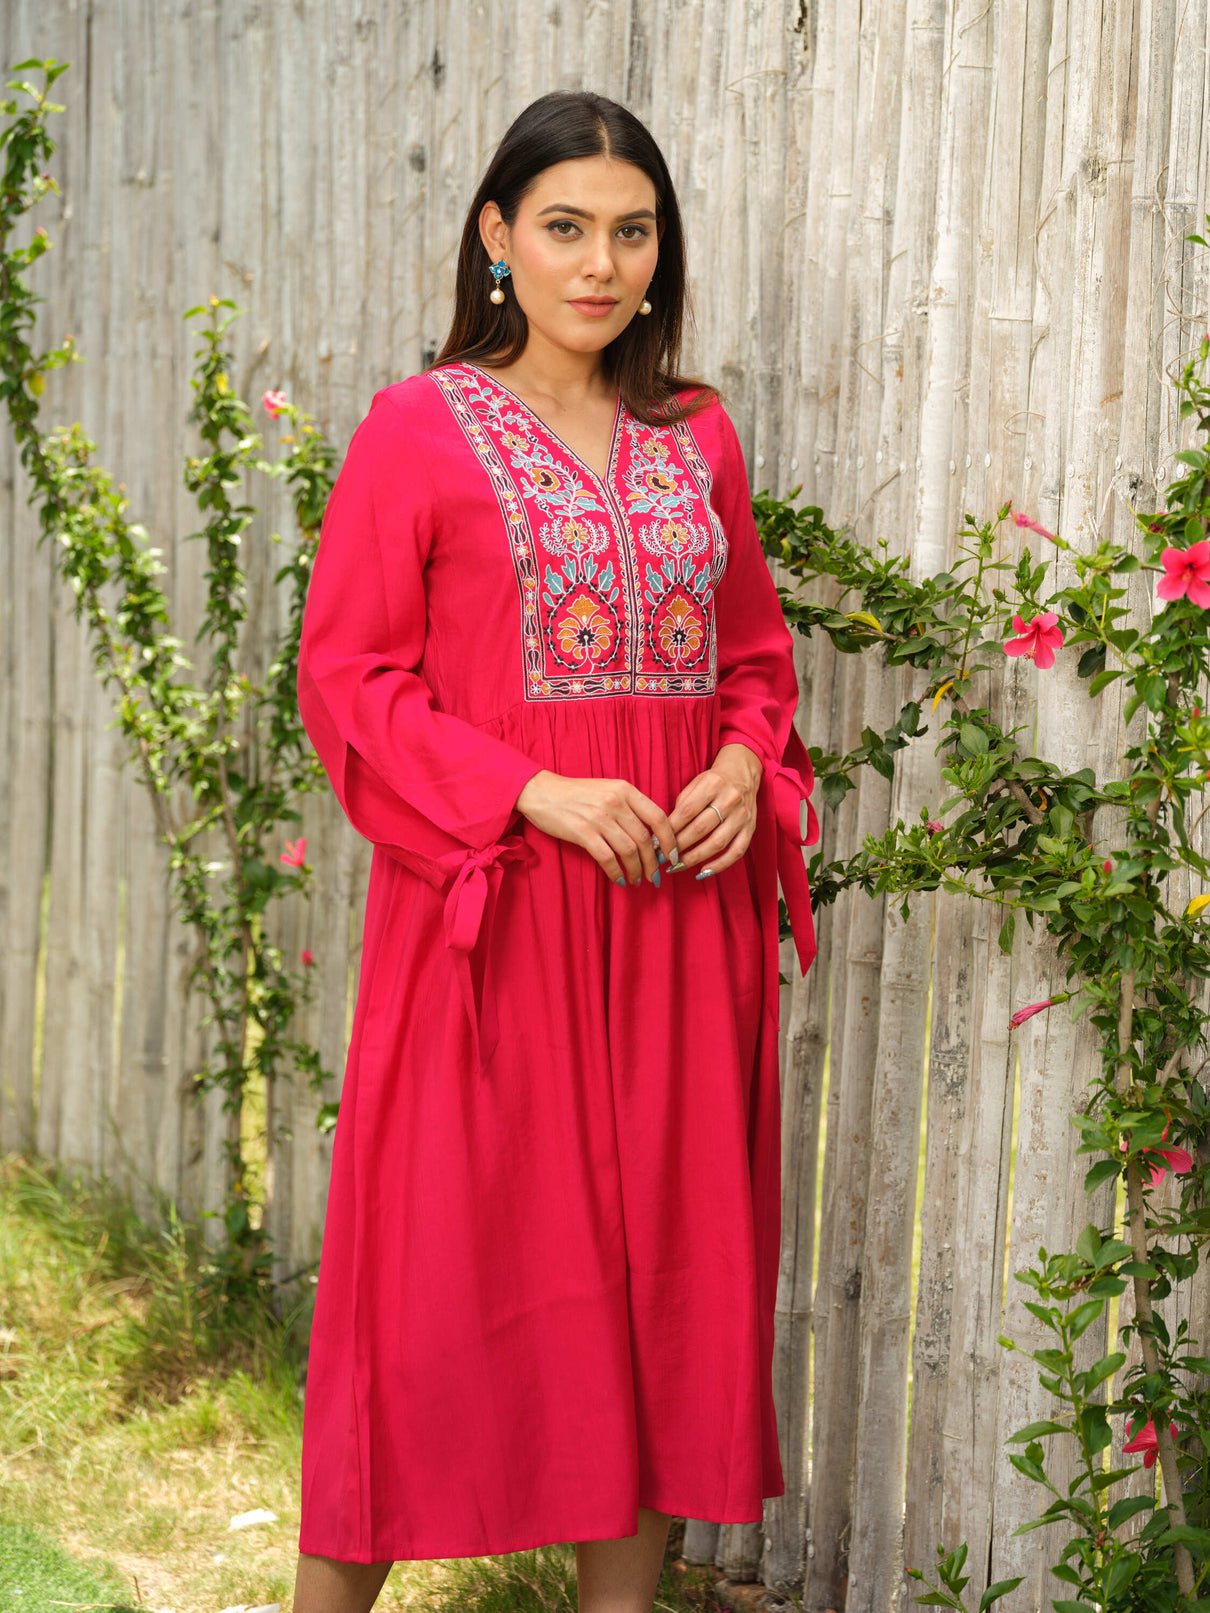 Solid Colored Dress with an Embellished Yoke Etiquette Apparel